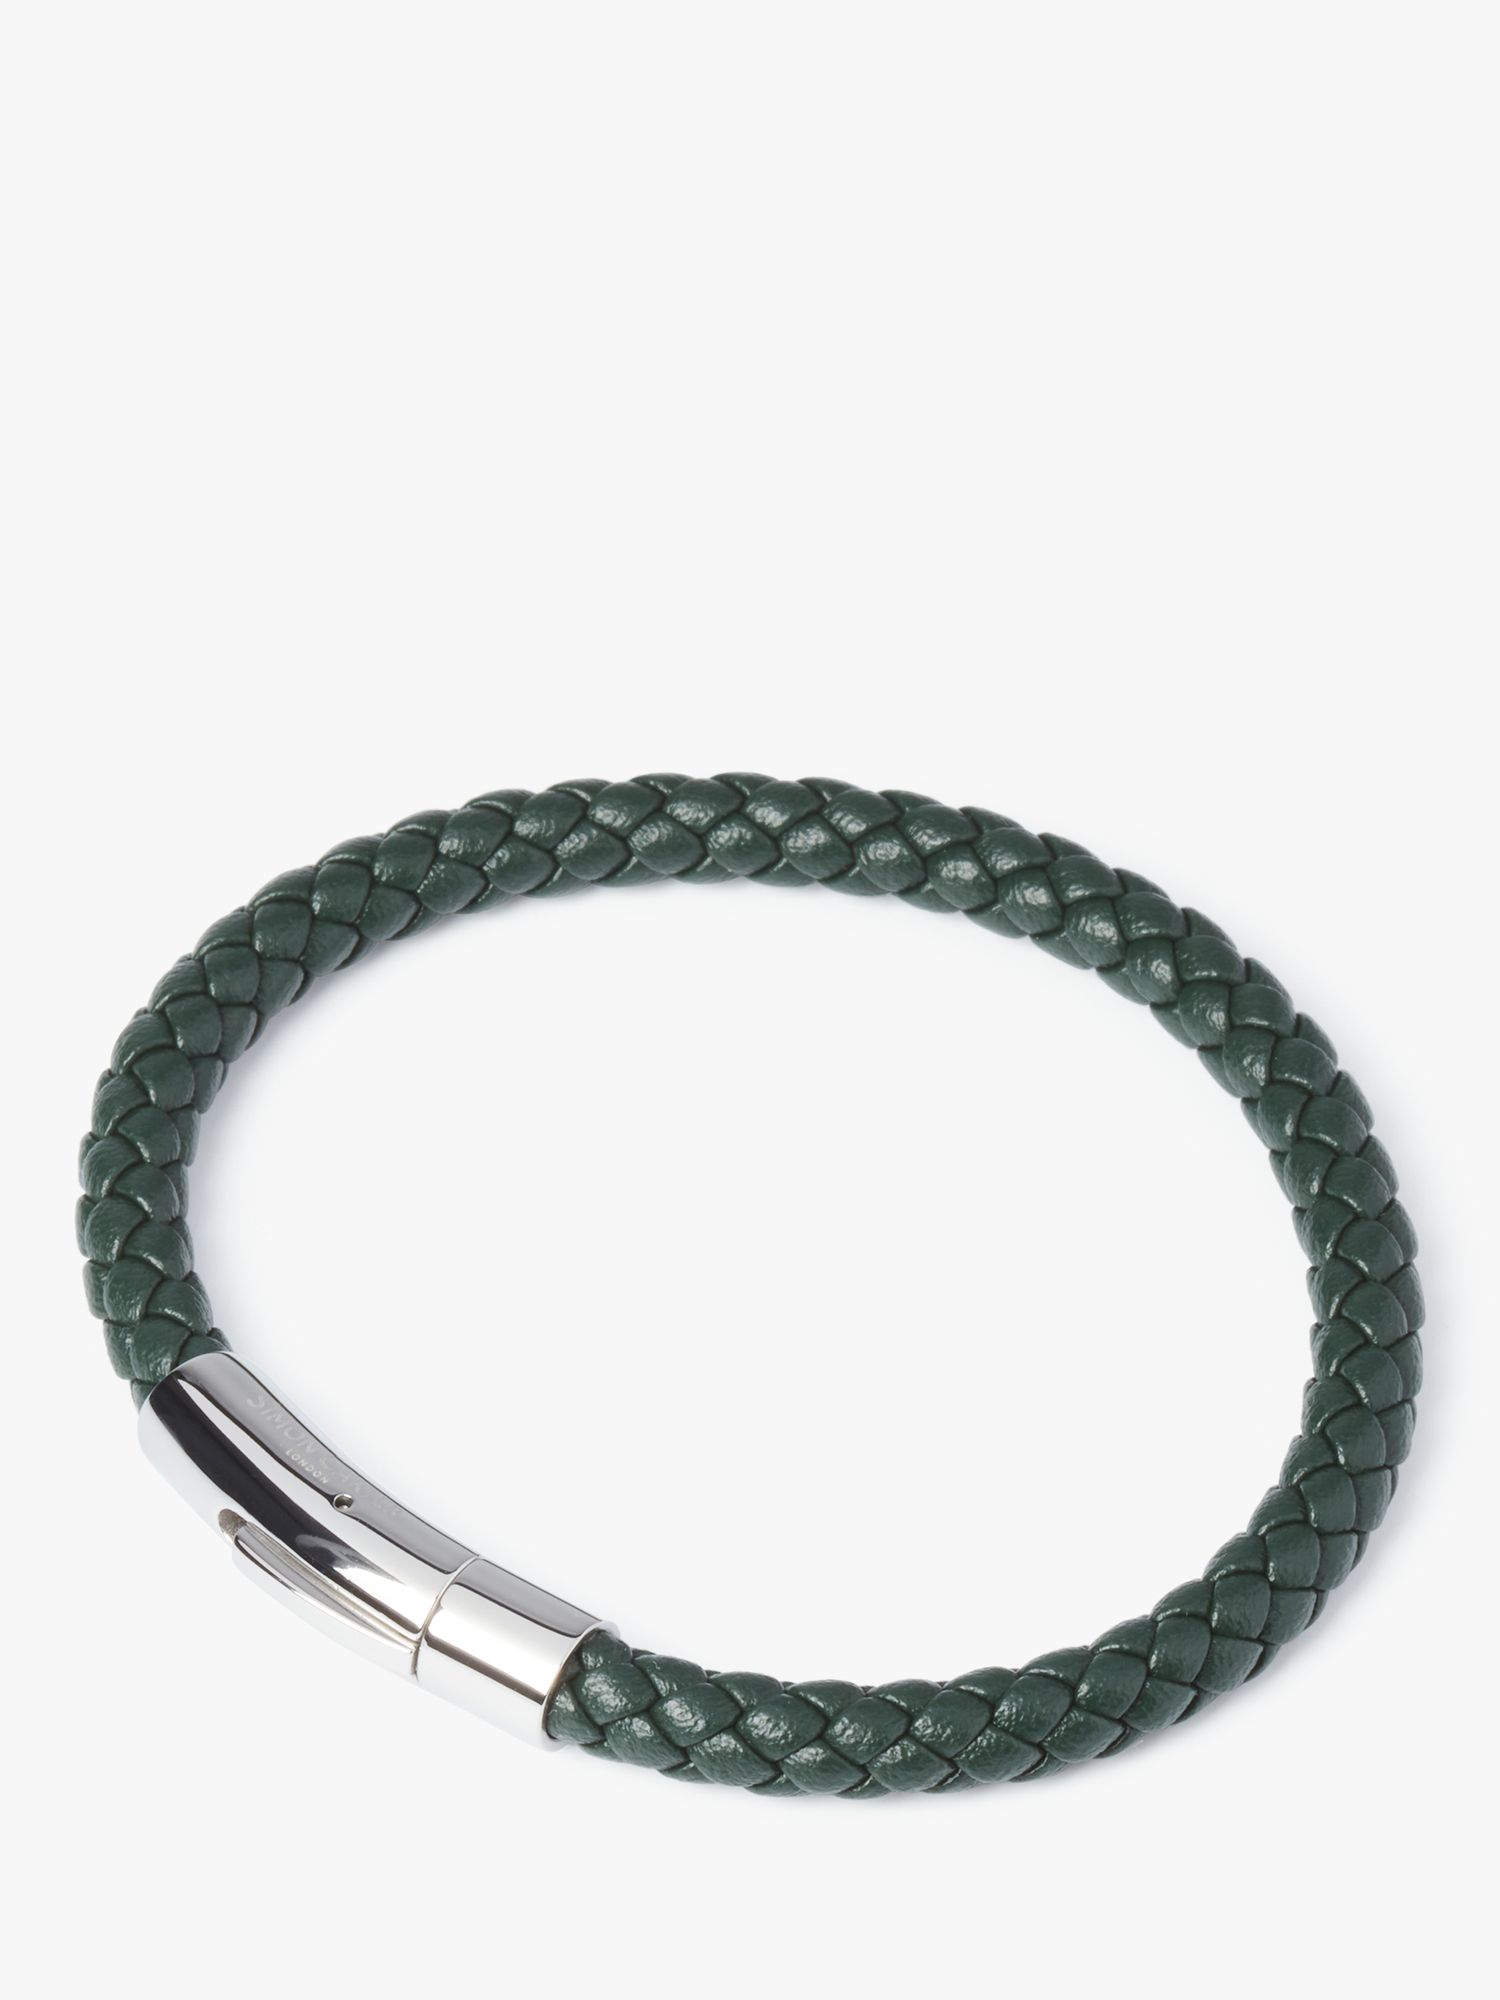 Buy Simon Carter Newquay Braided Leather Bracelet, Green Online at johnlewis.com